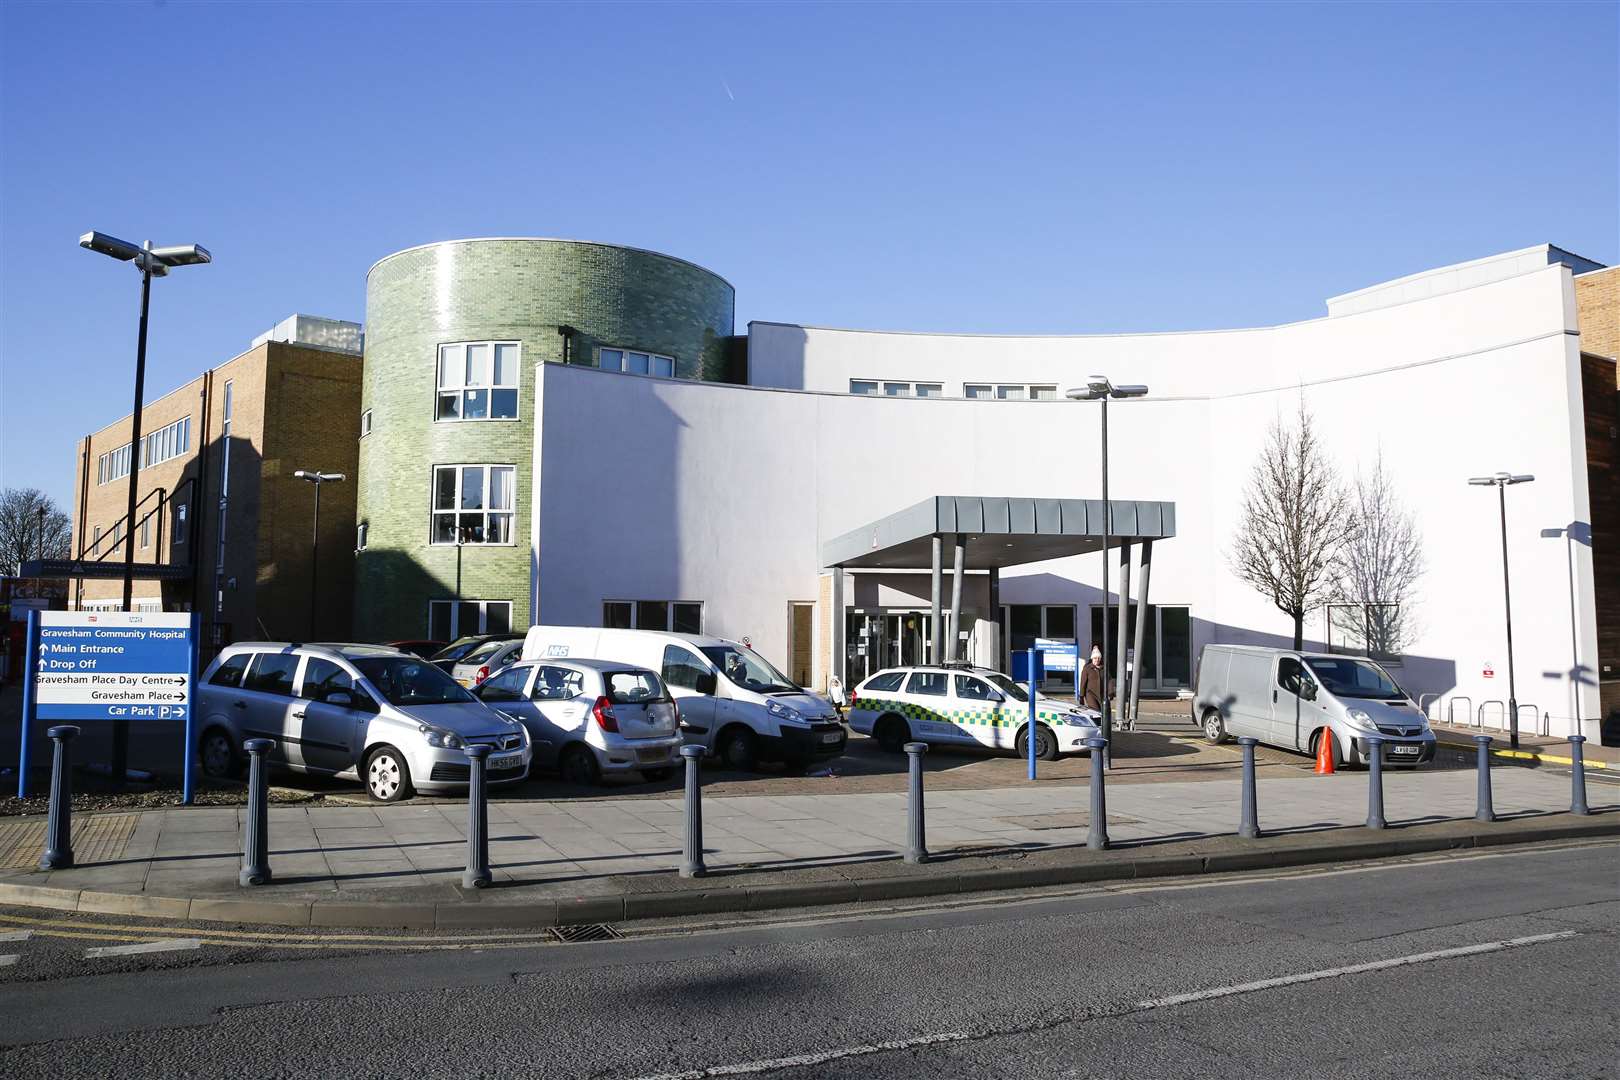 The Gravesham Community Hospital will host one of the new urgent treatment centres for north Kent